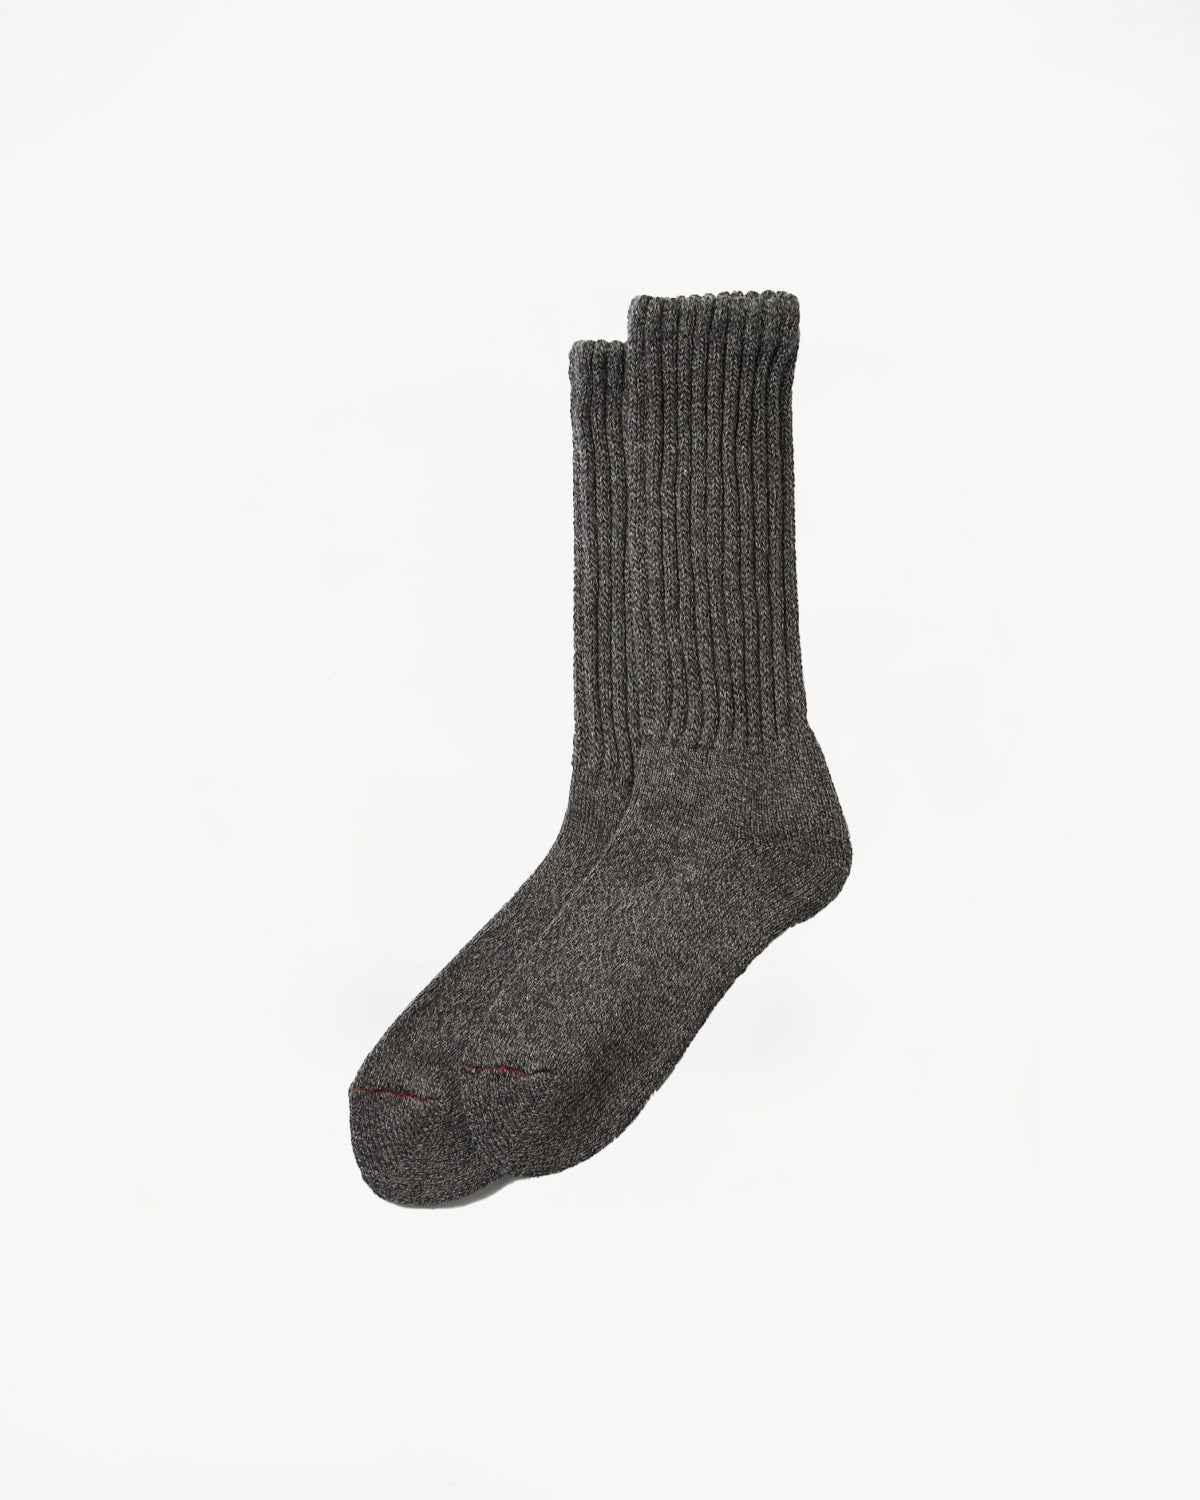 R1334 - Loose Pile Crew Sock - Mix Charcoal